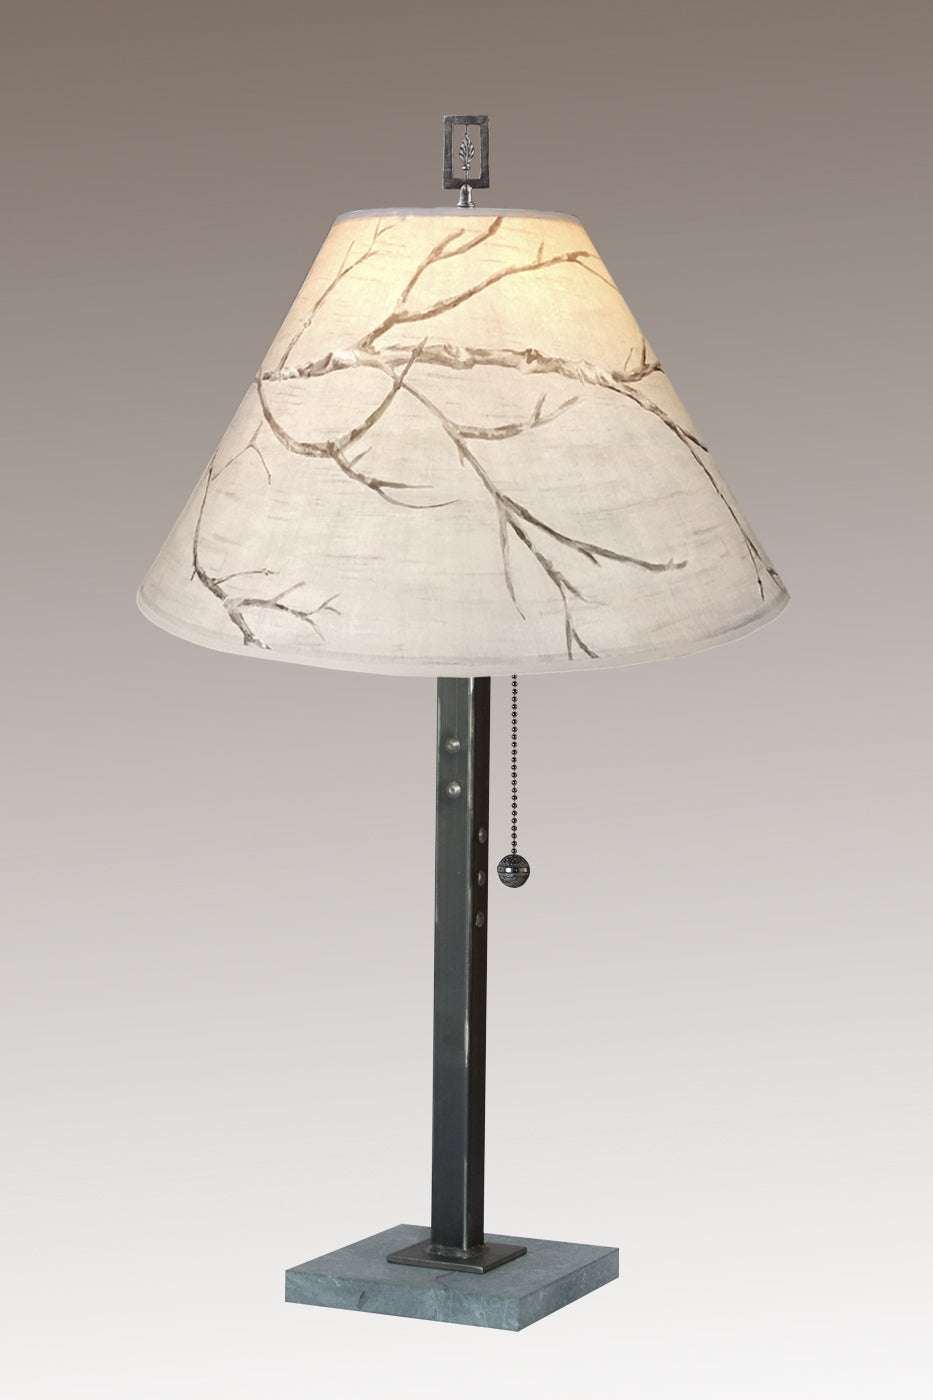 Steel Table Lamp with Medium Conical Shade in Sweeping Branch